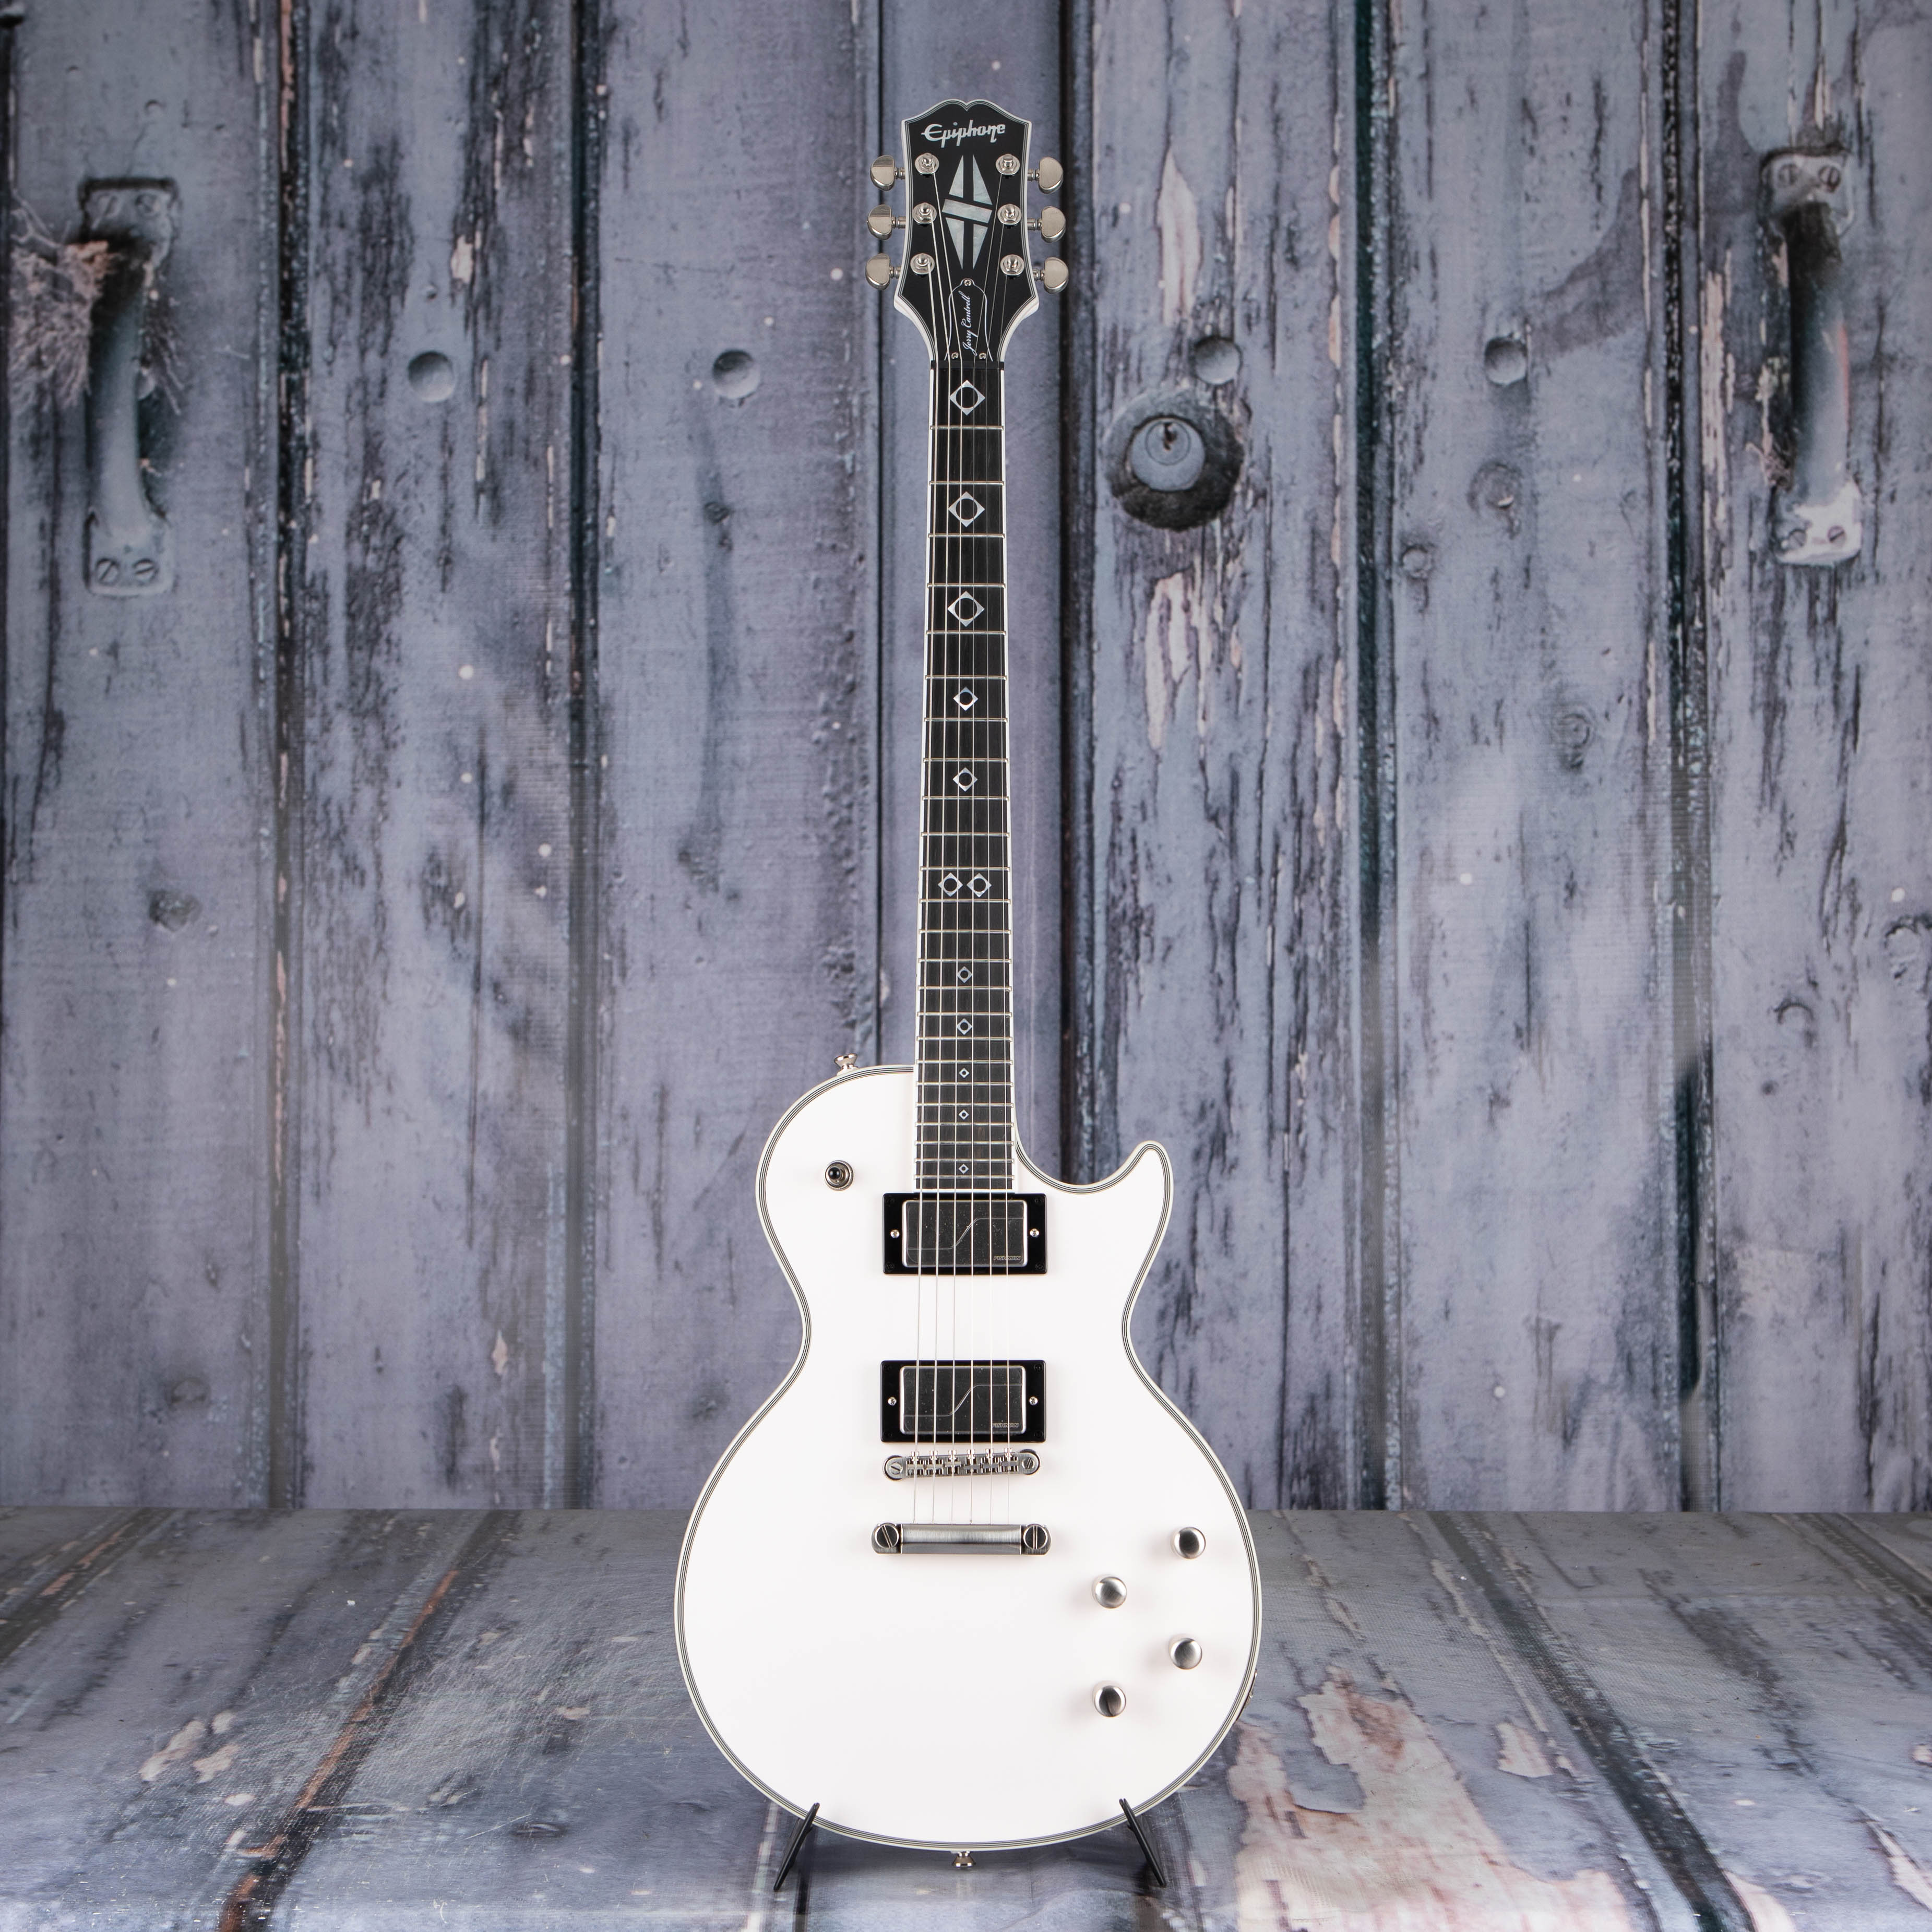 Epiphone Jerry Cantrell Prophecy Les Paul Custom Electric Guitar, Bone White, front